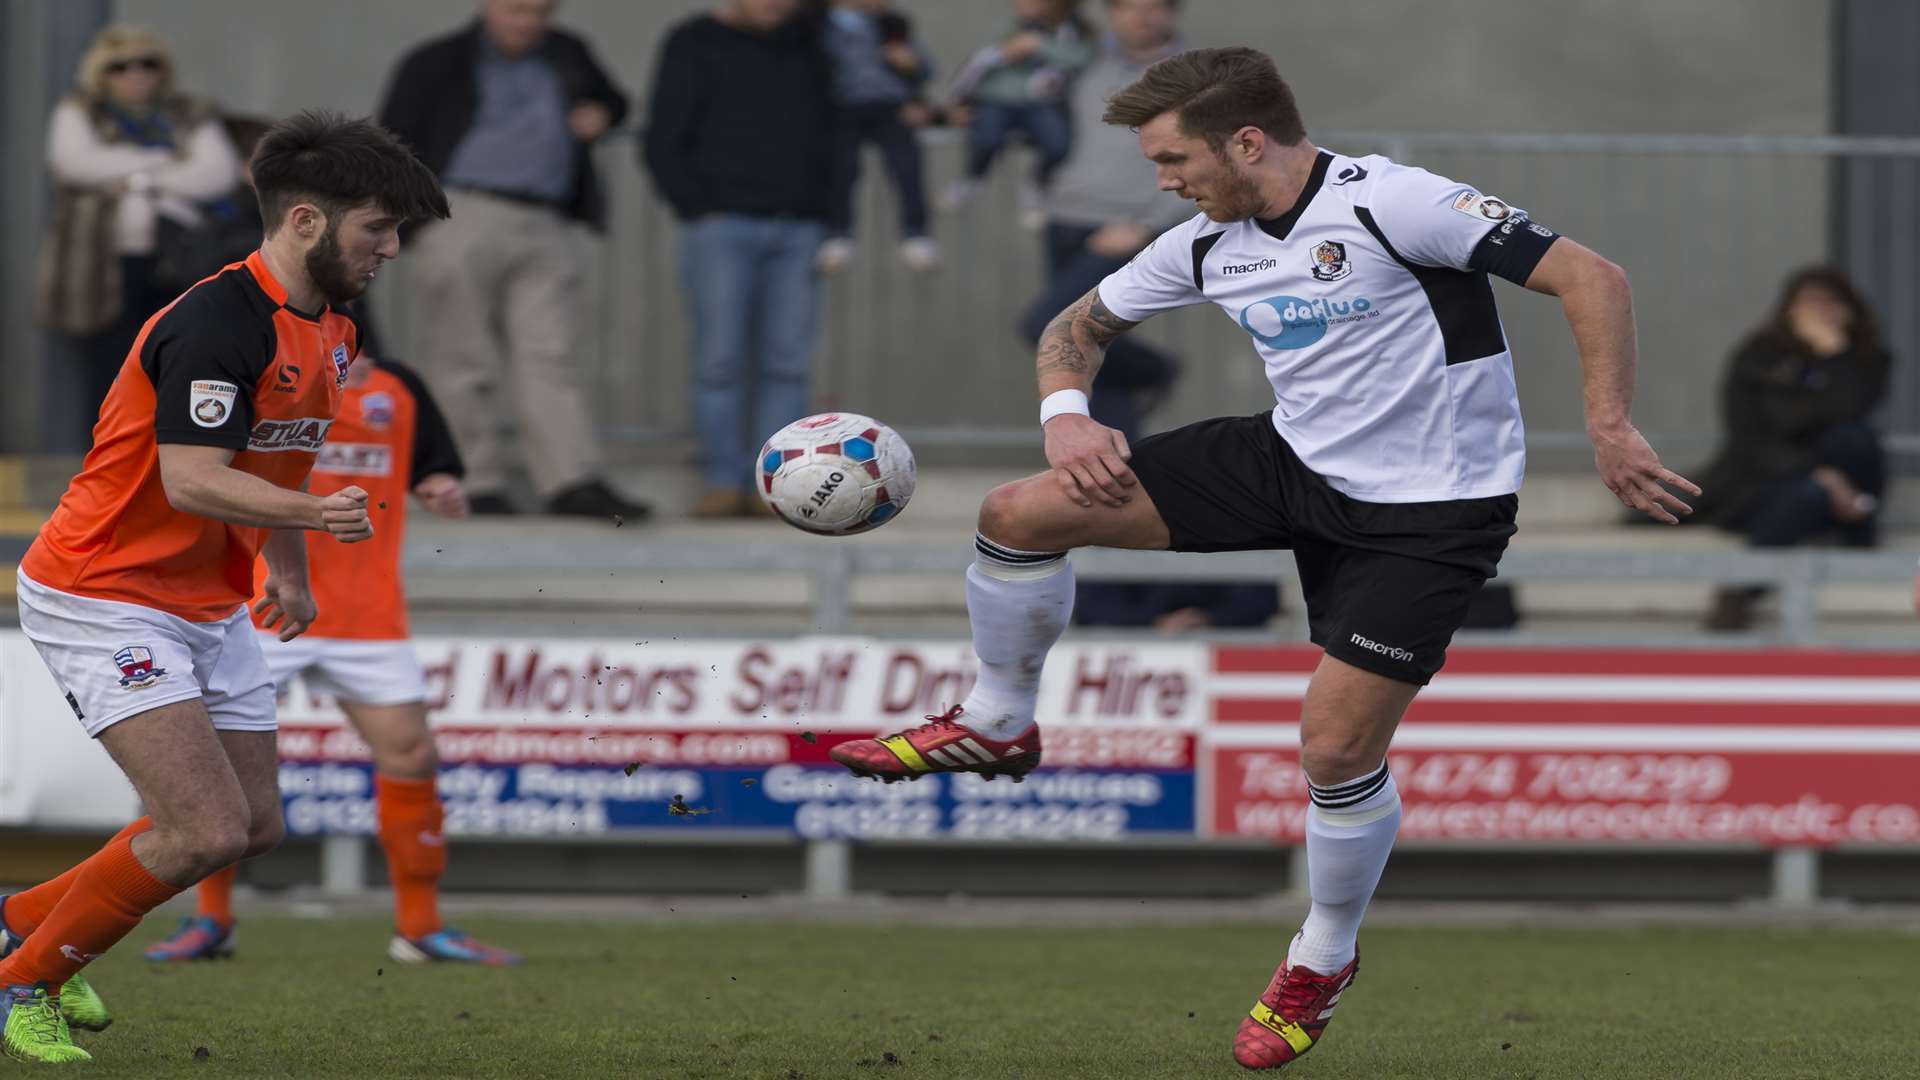 Elliot Bradbrook scored Dartford's equaliser from the penalty spot Picture: Andy Payton